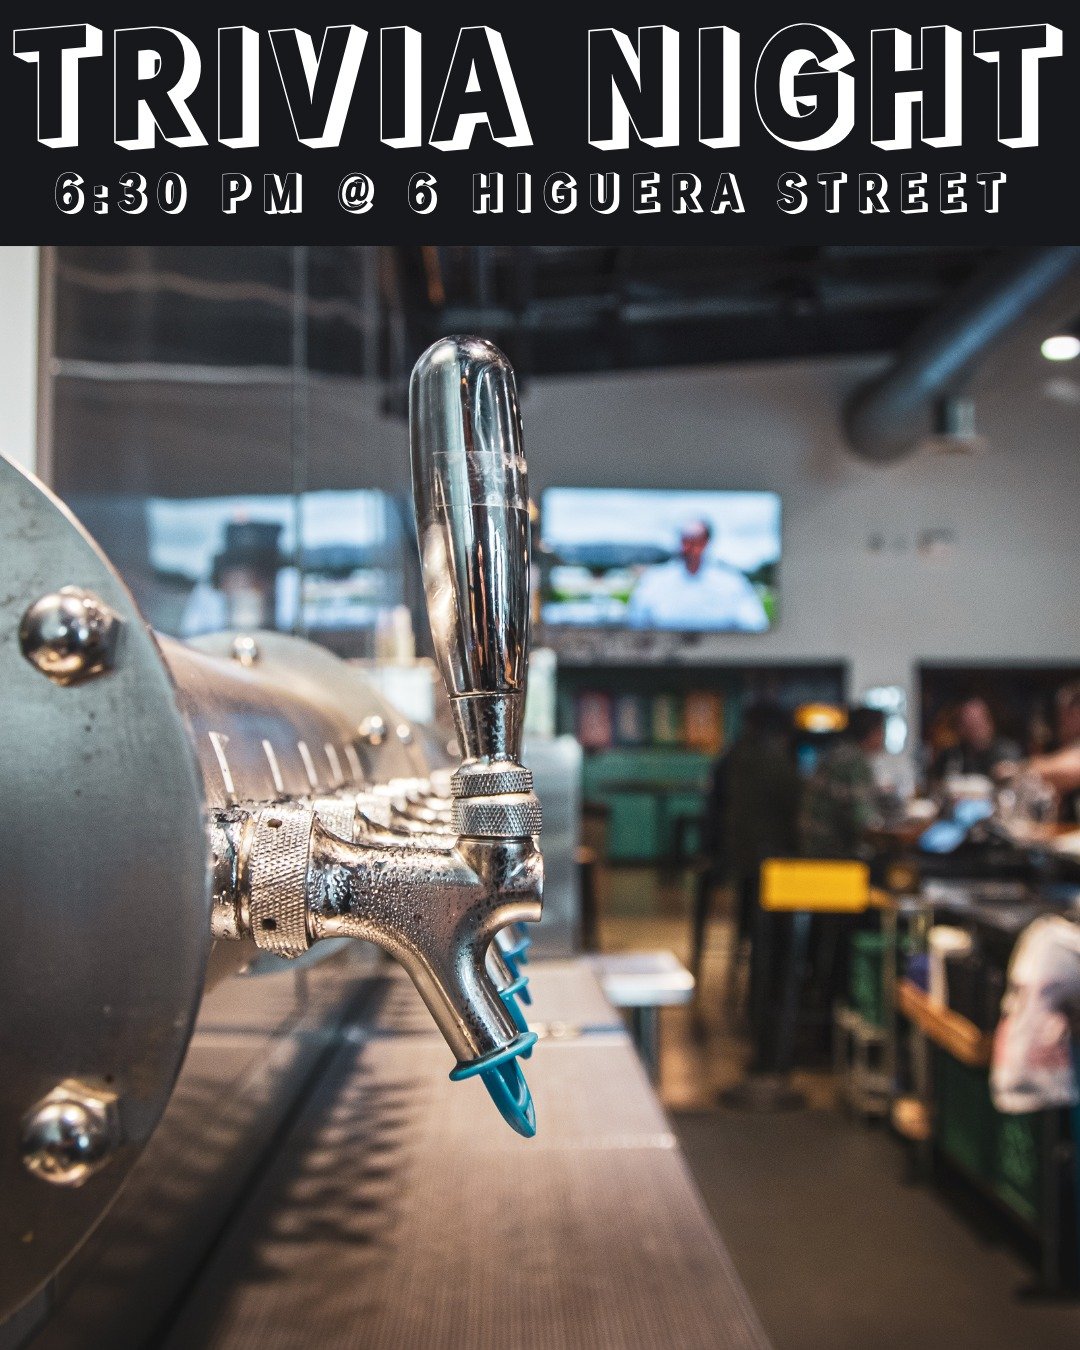 Get ready to test your knowledge and enjoy some brews at Tuesday Trivia Night! Join us tonight at 6:30 pm on Higuera Street for an unforgettable live trivia experience. Gather your team, arrive early, and compete for exciting prizes!